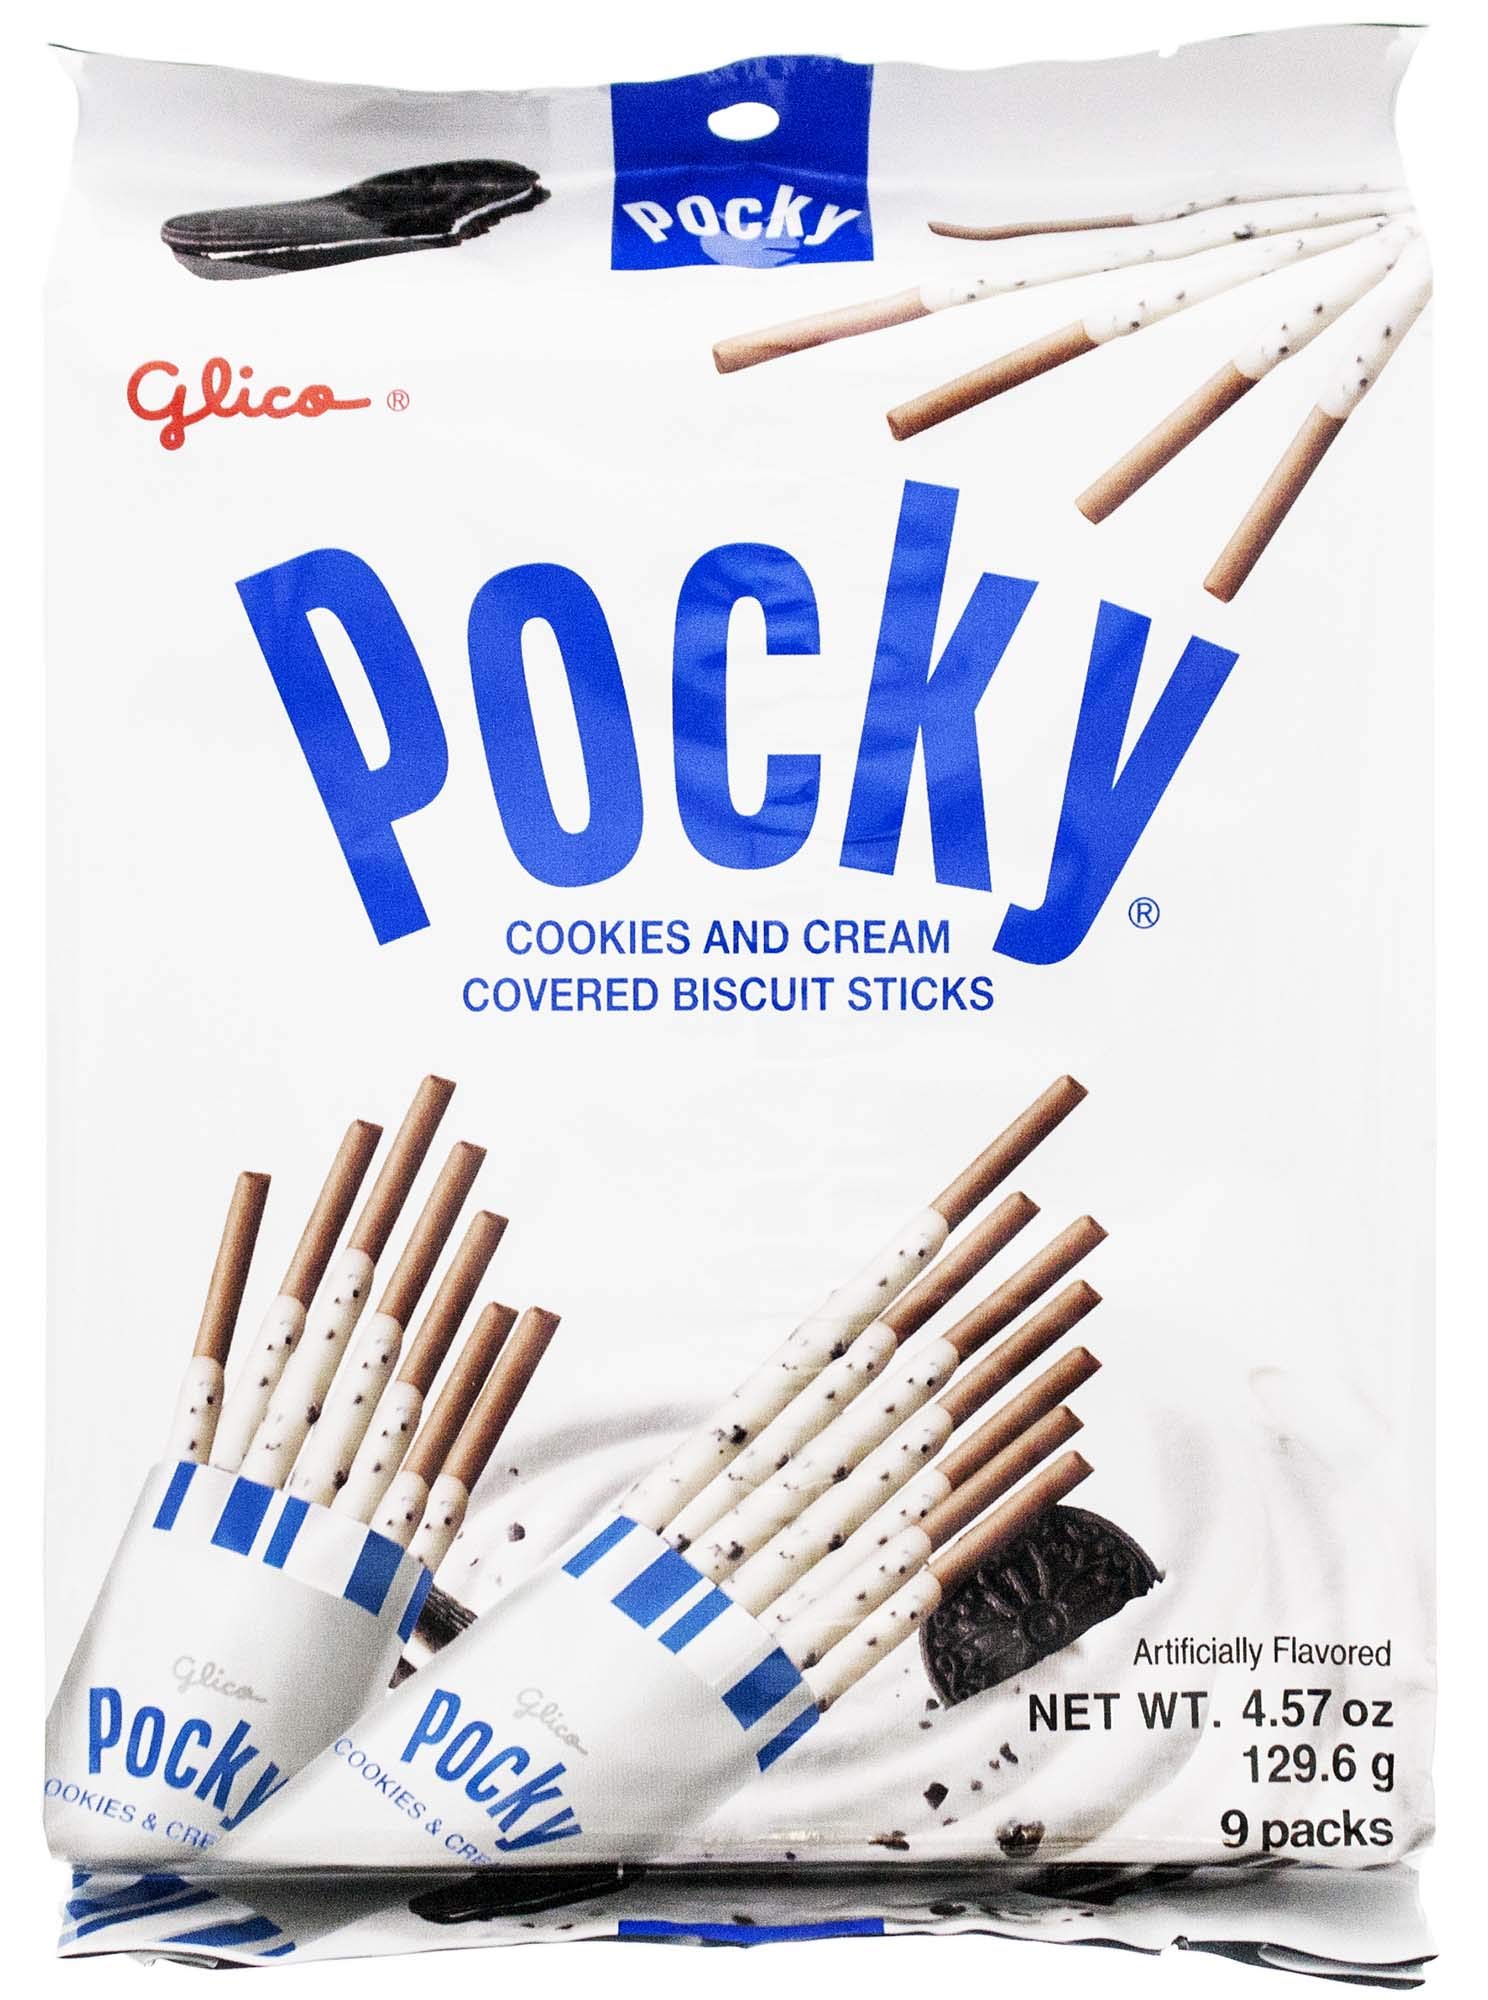 Pocky Glico Cookie And Cream Covered Cocoa Biscuit Sticks, 4.57 Ounce [Subscribe & Save] $2.79 @ Amazon